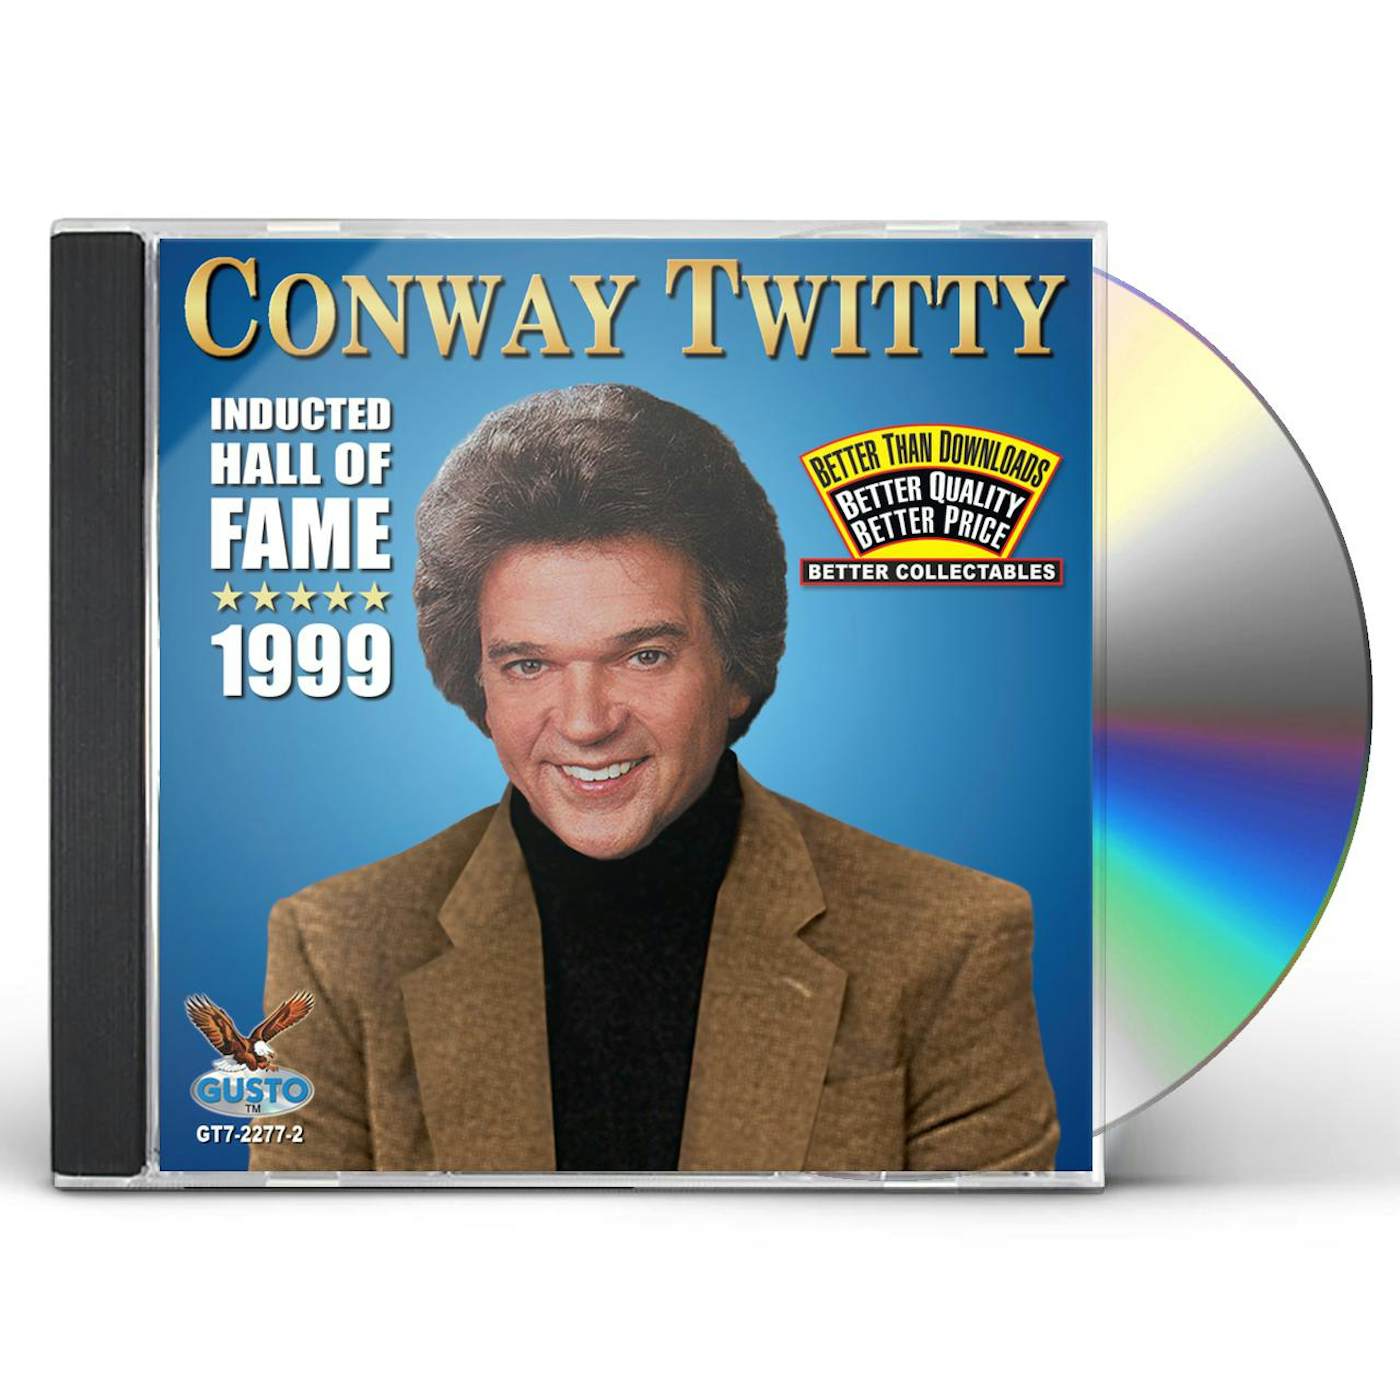 Conway Twitty INDUCTED HALL OF FAME 1999 CD